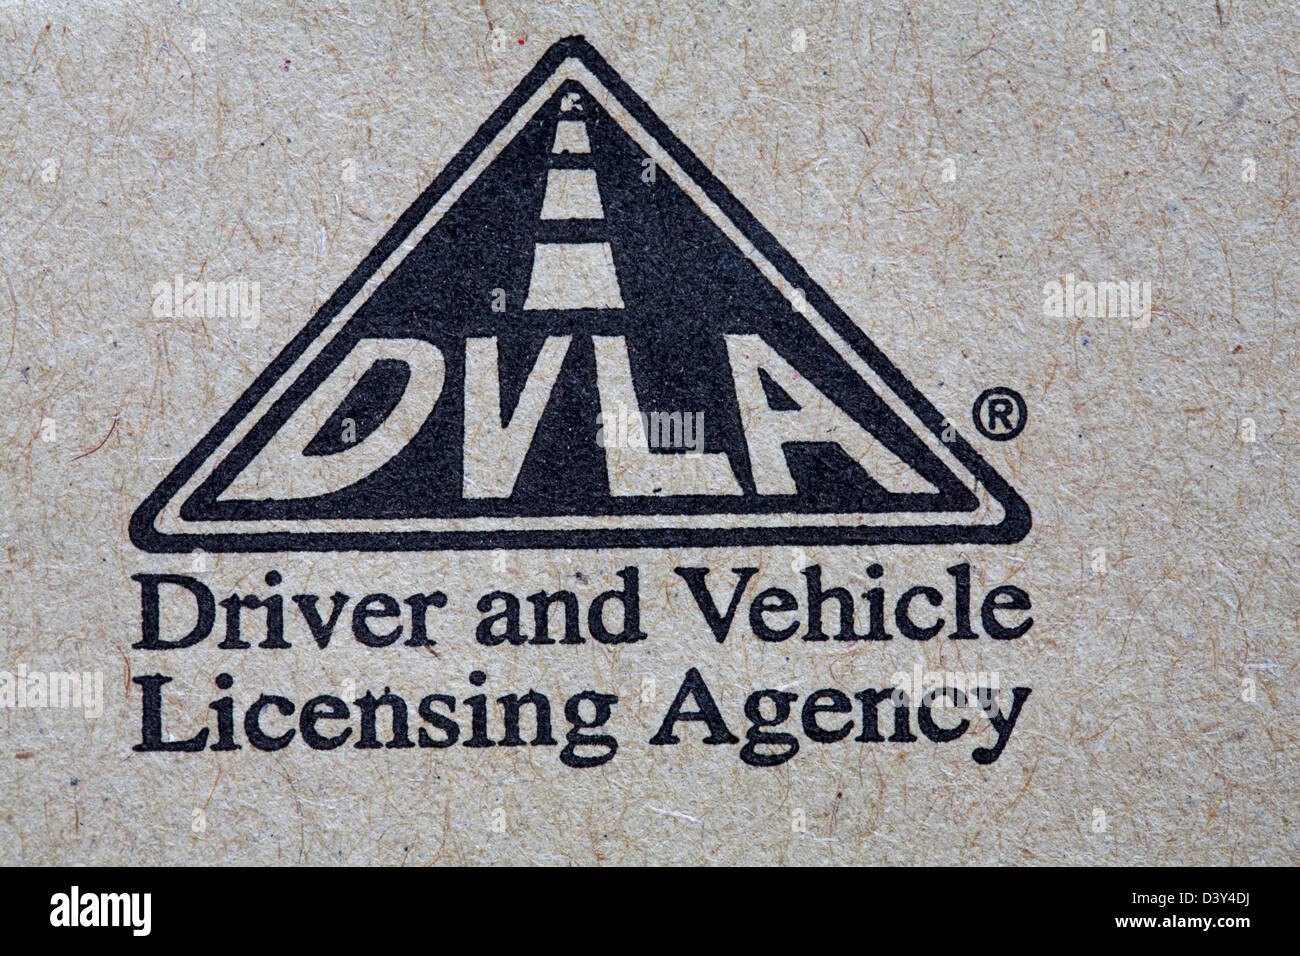 Dvla Driver And Vehicle Licensing Agency Stamped On Envelope Stock